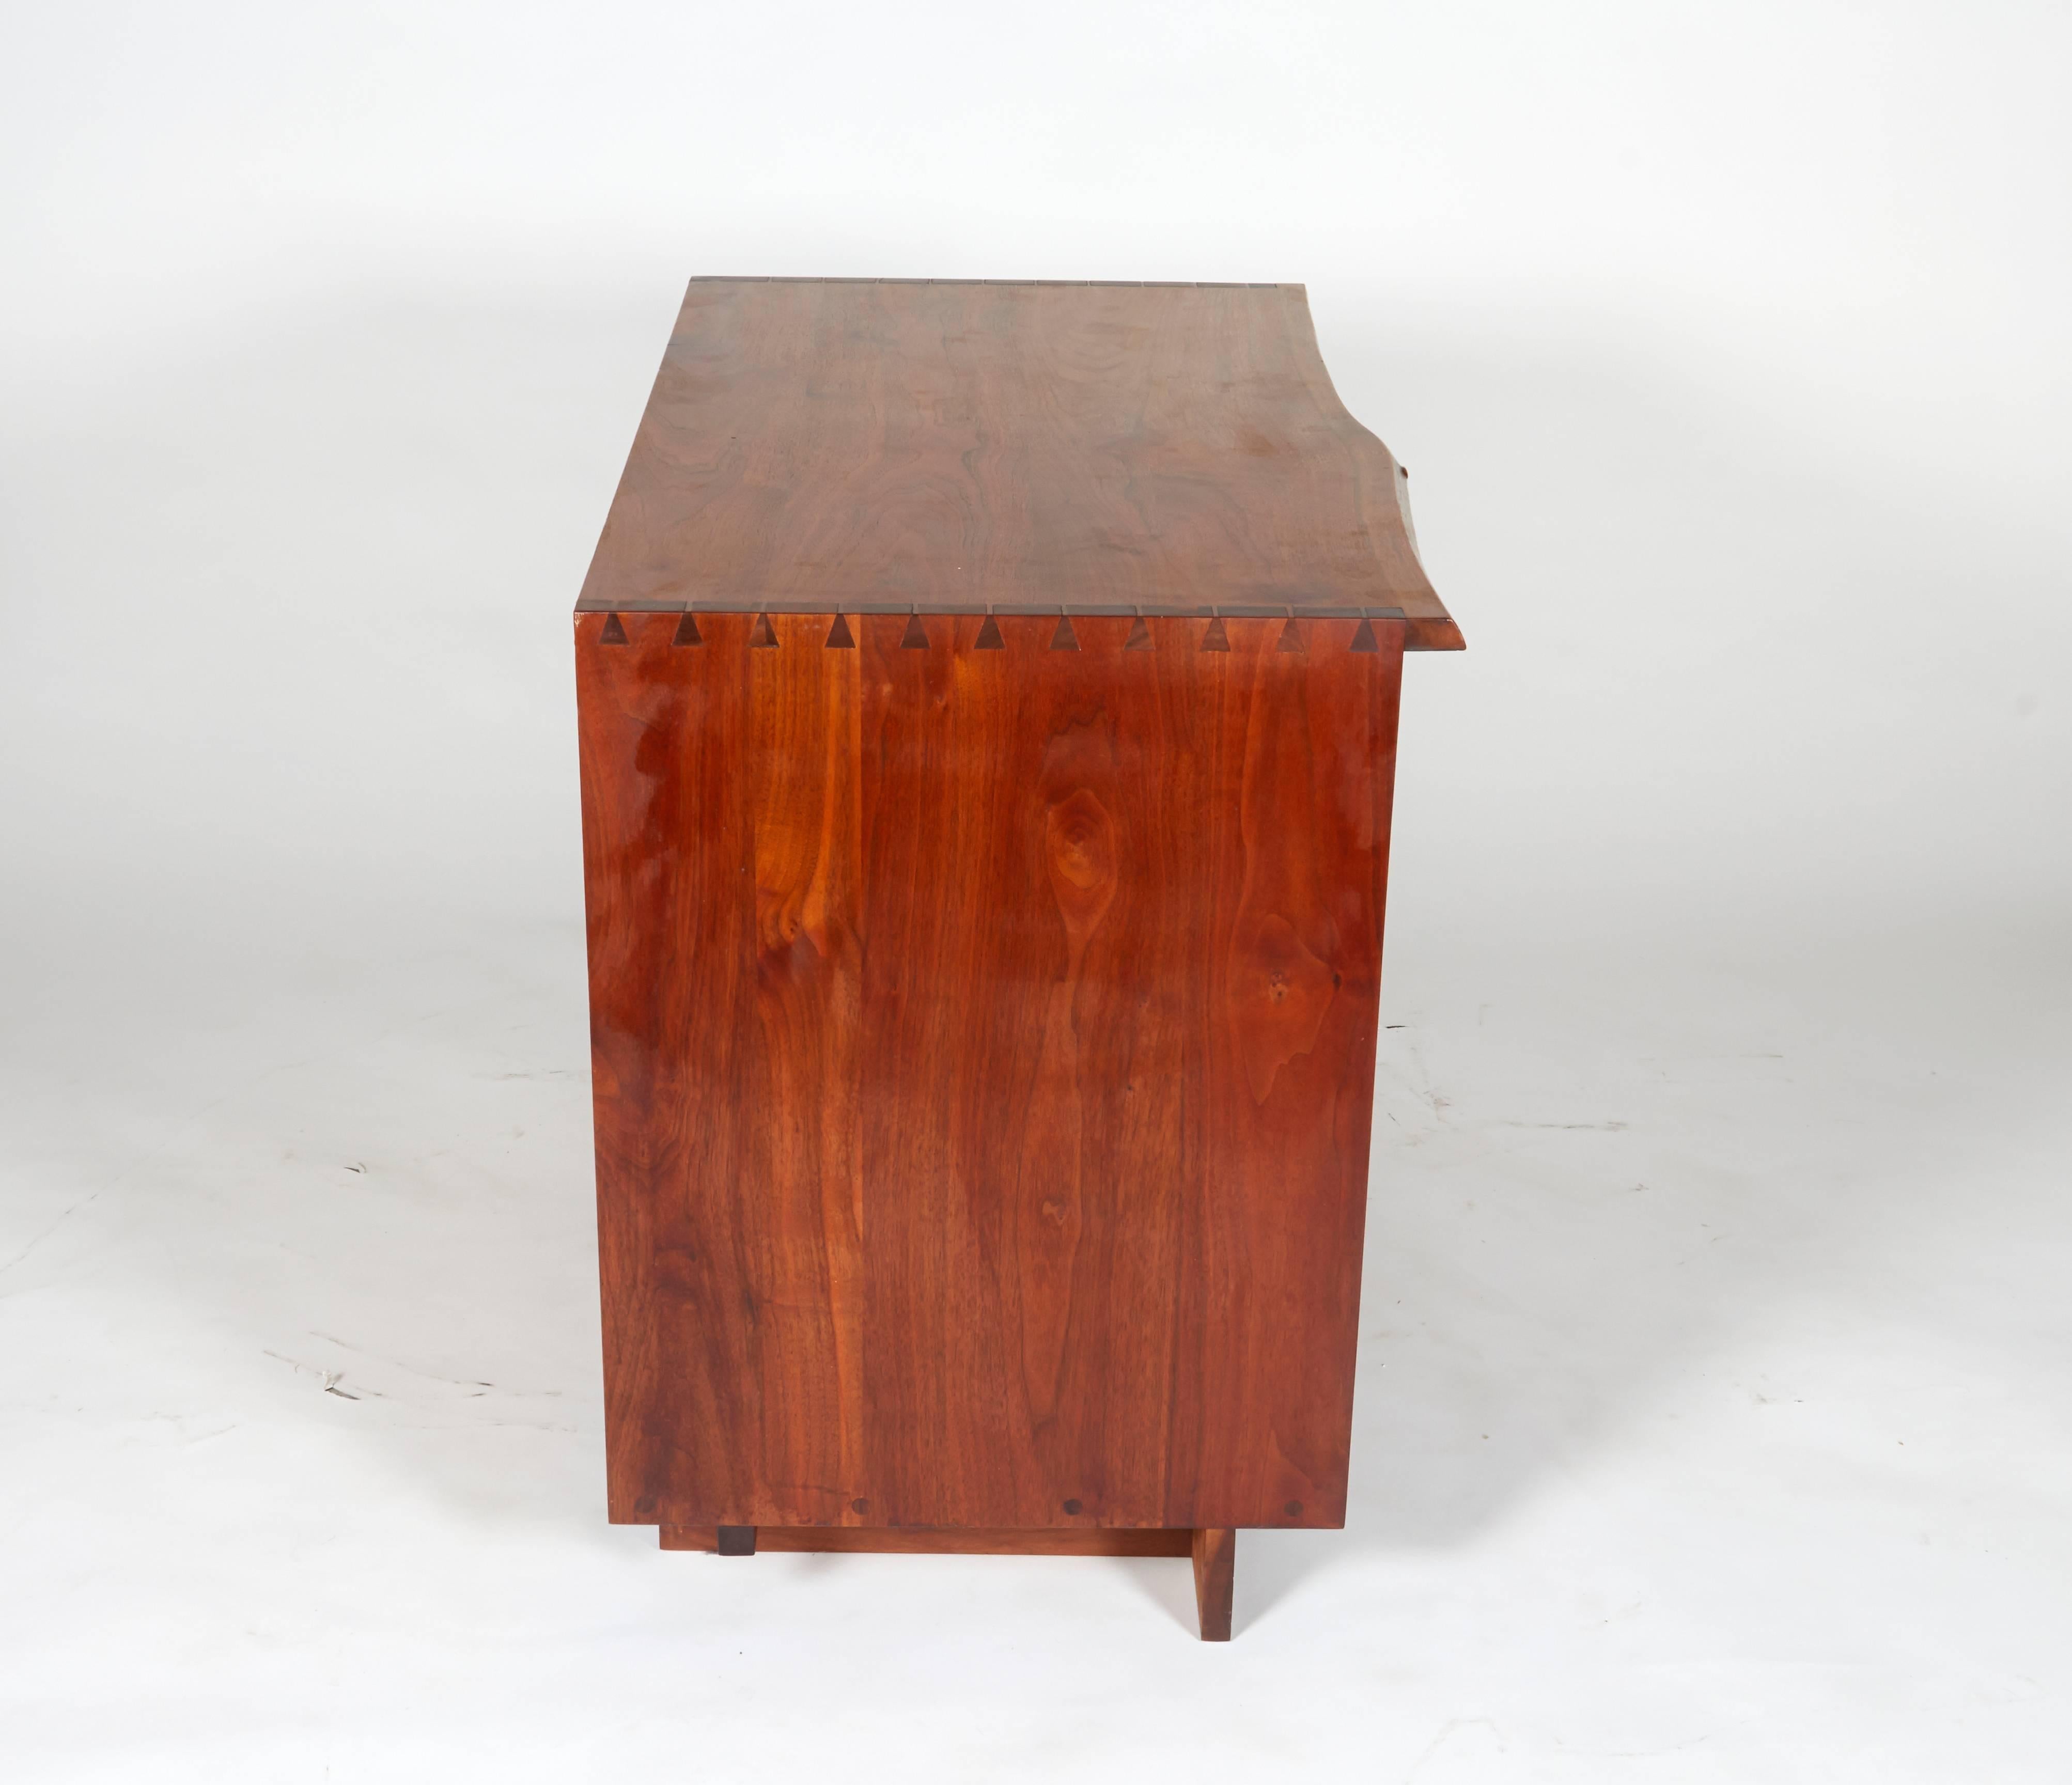 Rare in the free edge form this chest has Nakashima's signature dovetail joinery and is in unusually good original condition.